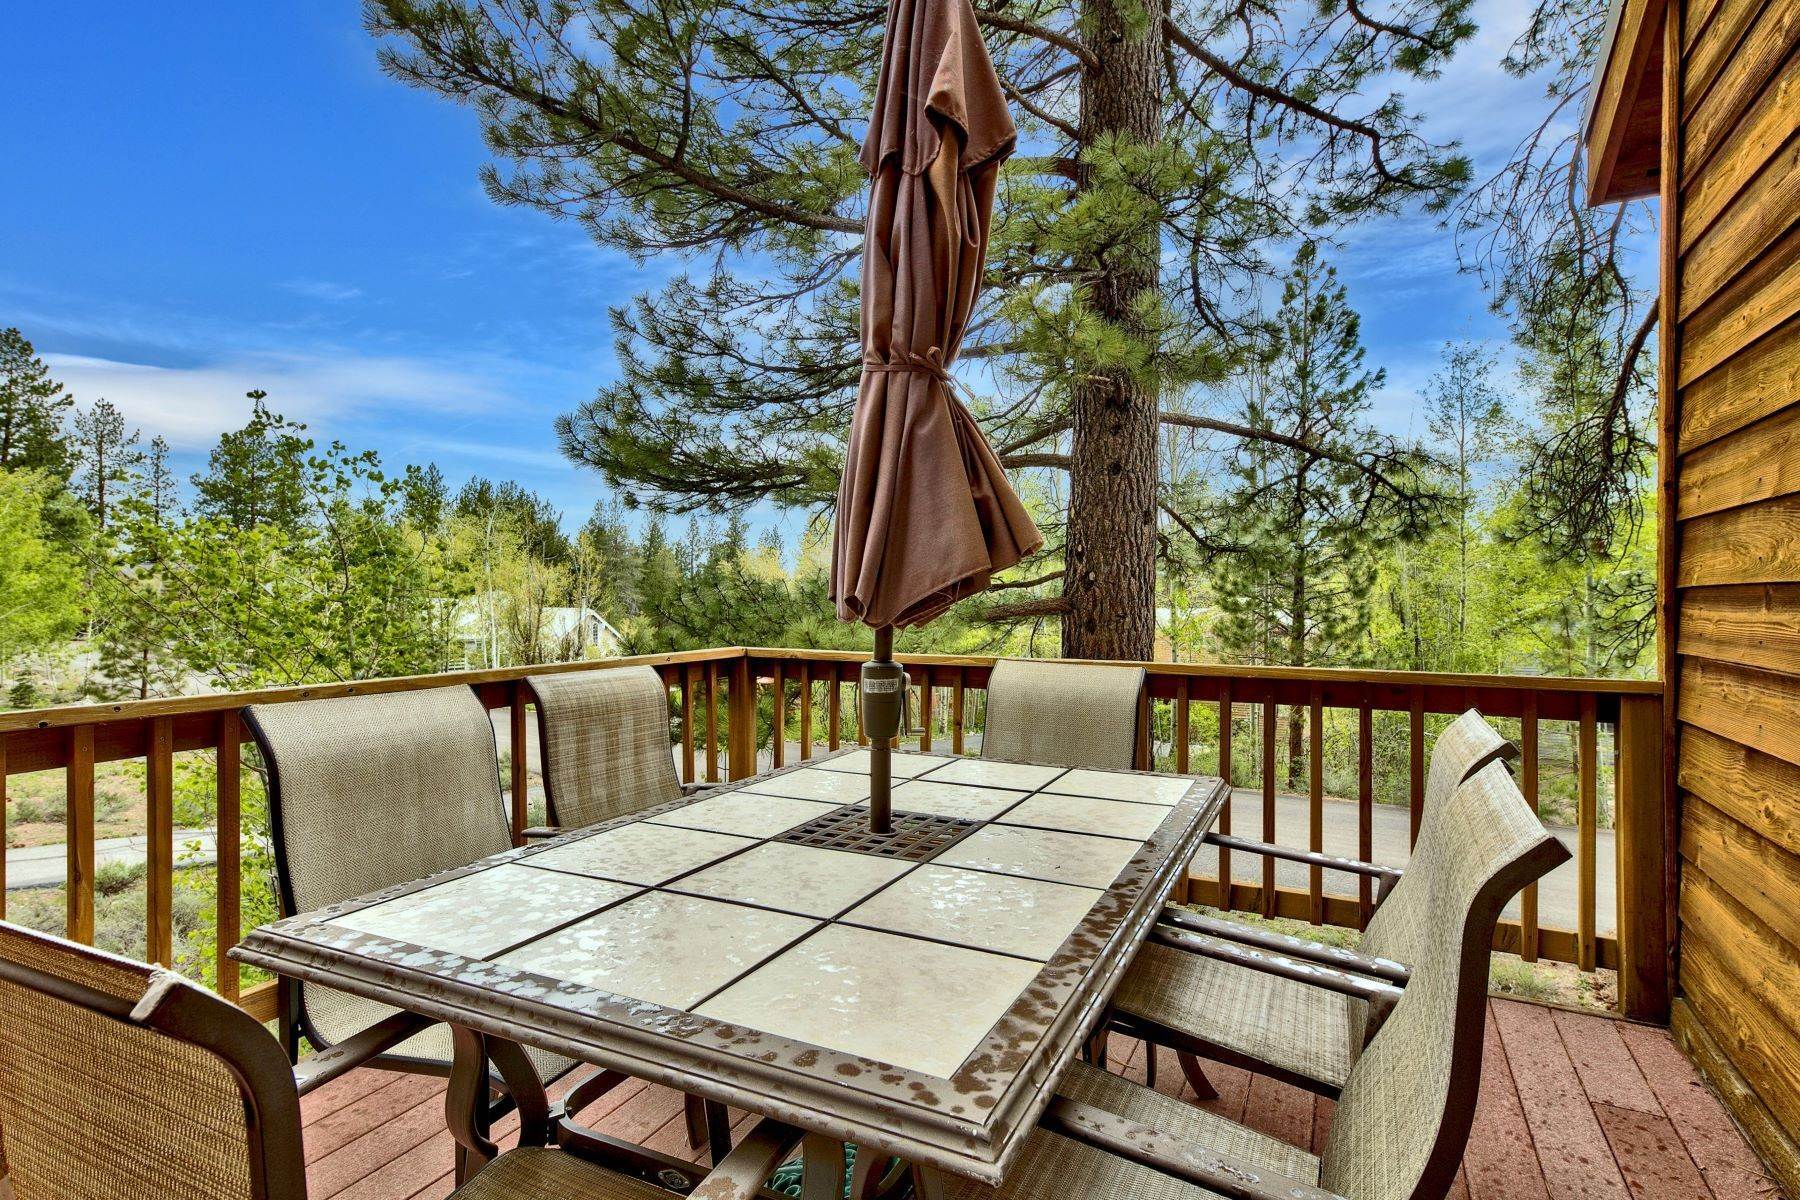 10. Fractional Ownership Property for Active at Ideal Vacation Cabin in Northstar 253 Basque Dr Truckee, California 96161 United States